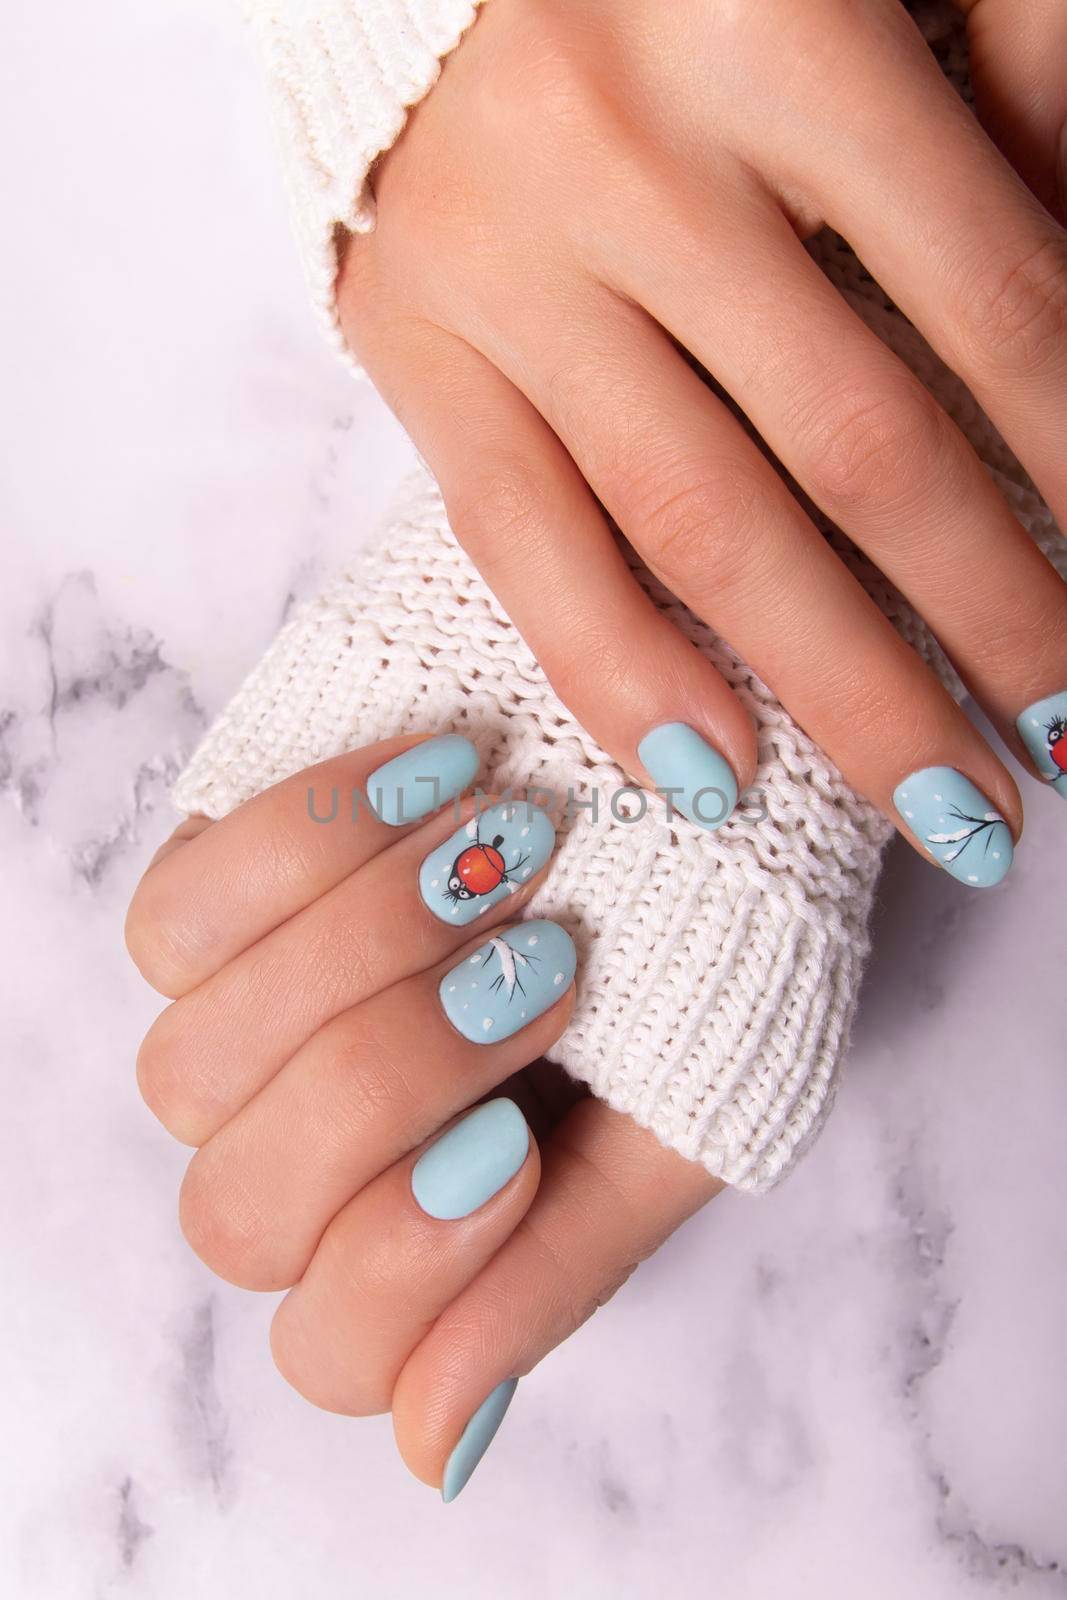 Female hands with winter snow manicure with stickers. Professional gel nail polish by ssvimaliss